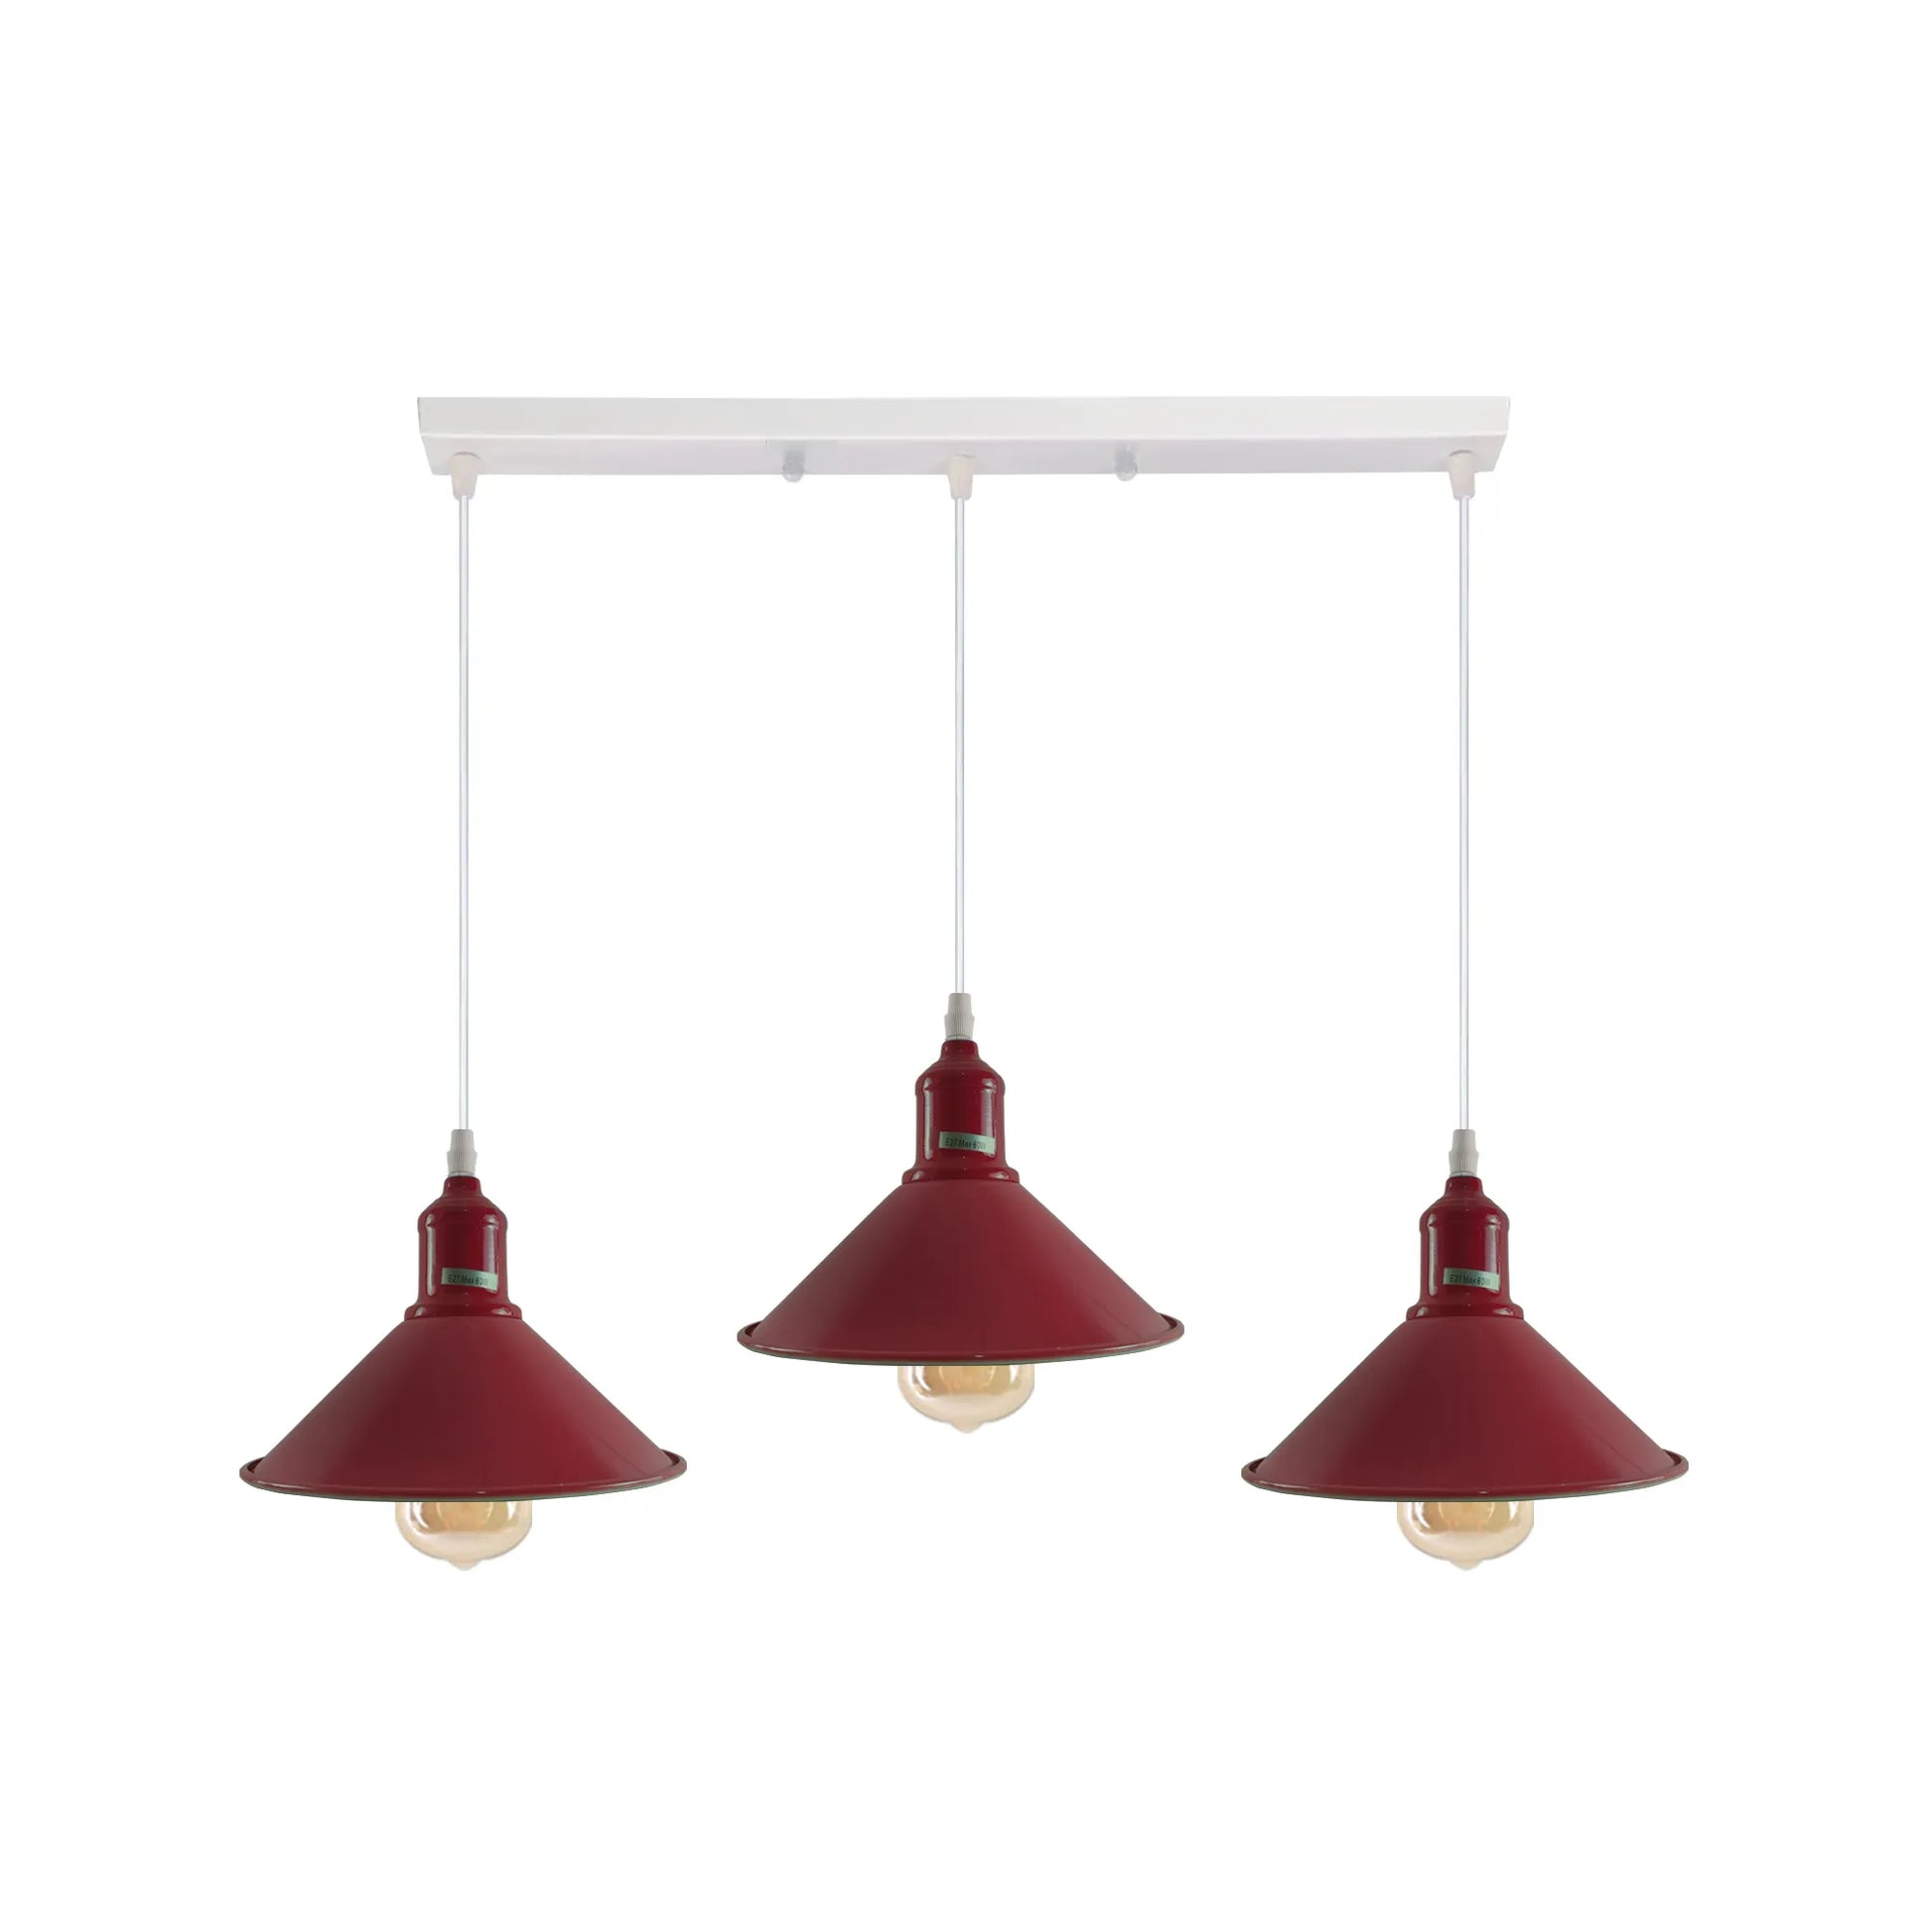 3 Way Industrial Vintage Hanging Pendent Ceiling Light Fittings